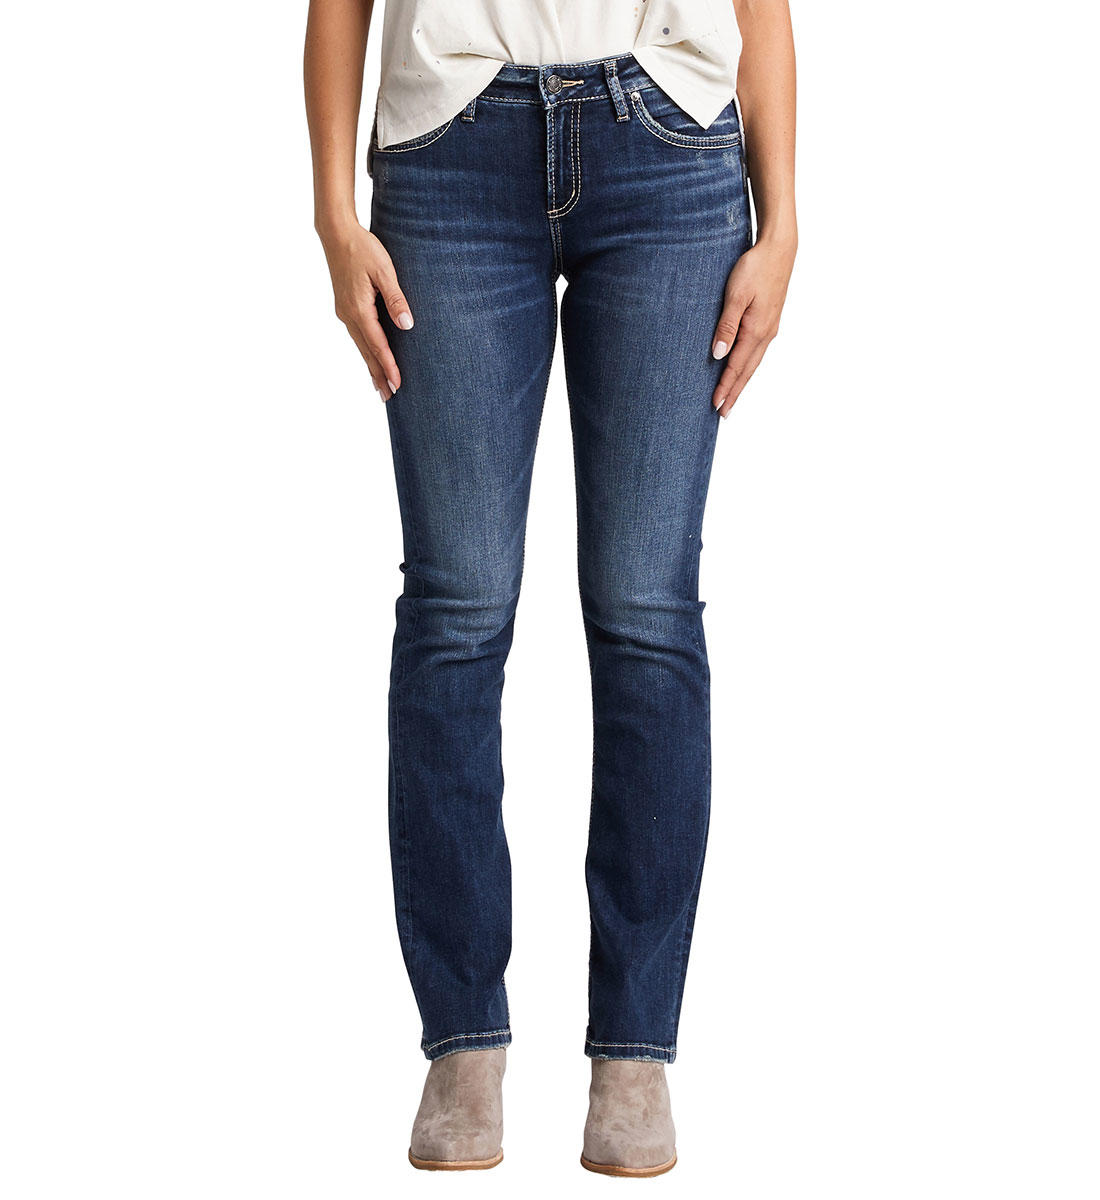 Silver Avery Slim Boot Jeans   Boasting a contemporary silhouette, Silver Avery Slim Boot Jeans provide an innovative high-rise, slim boot cut for an elegant modern look. Their Power Stretch Indigo Denim ensures a comfortable, curvaceous fit for all ladies.